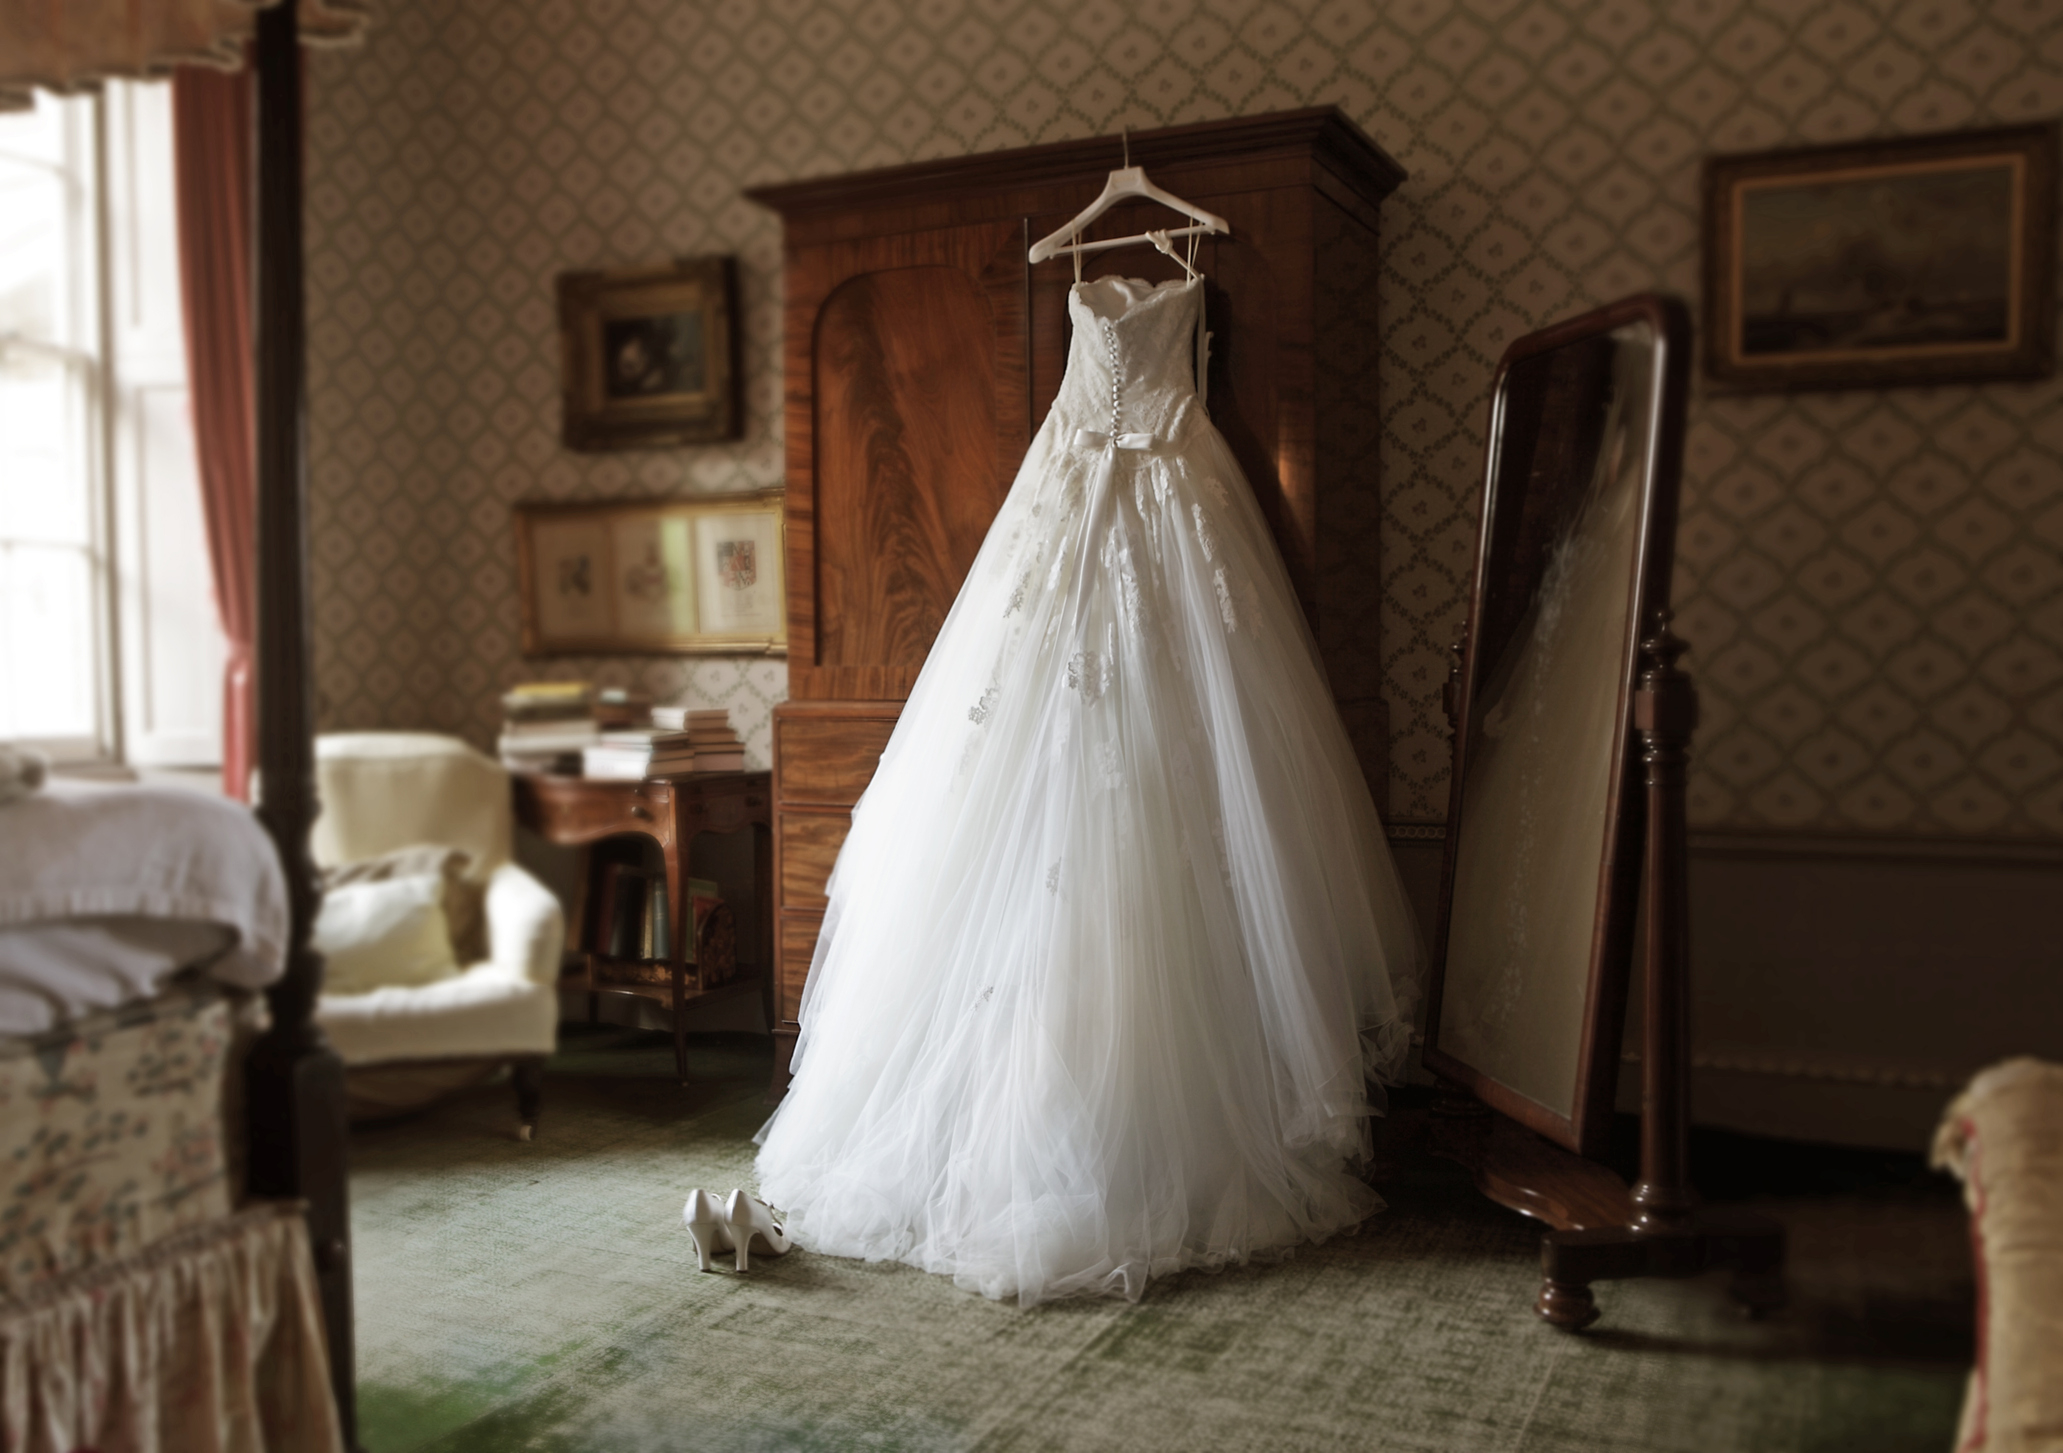 A wedding dress hanging outside an armoire